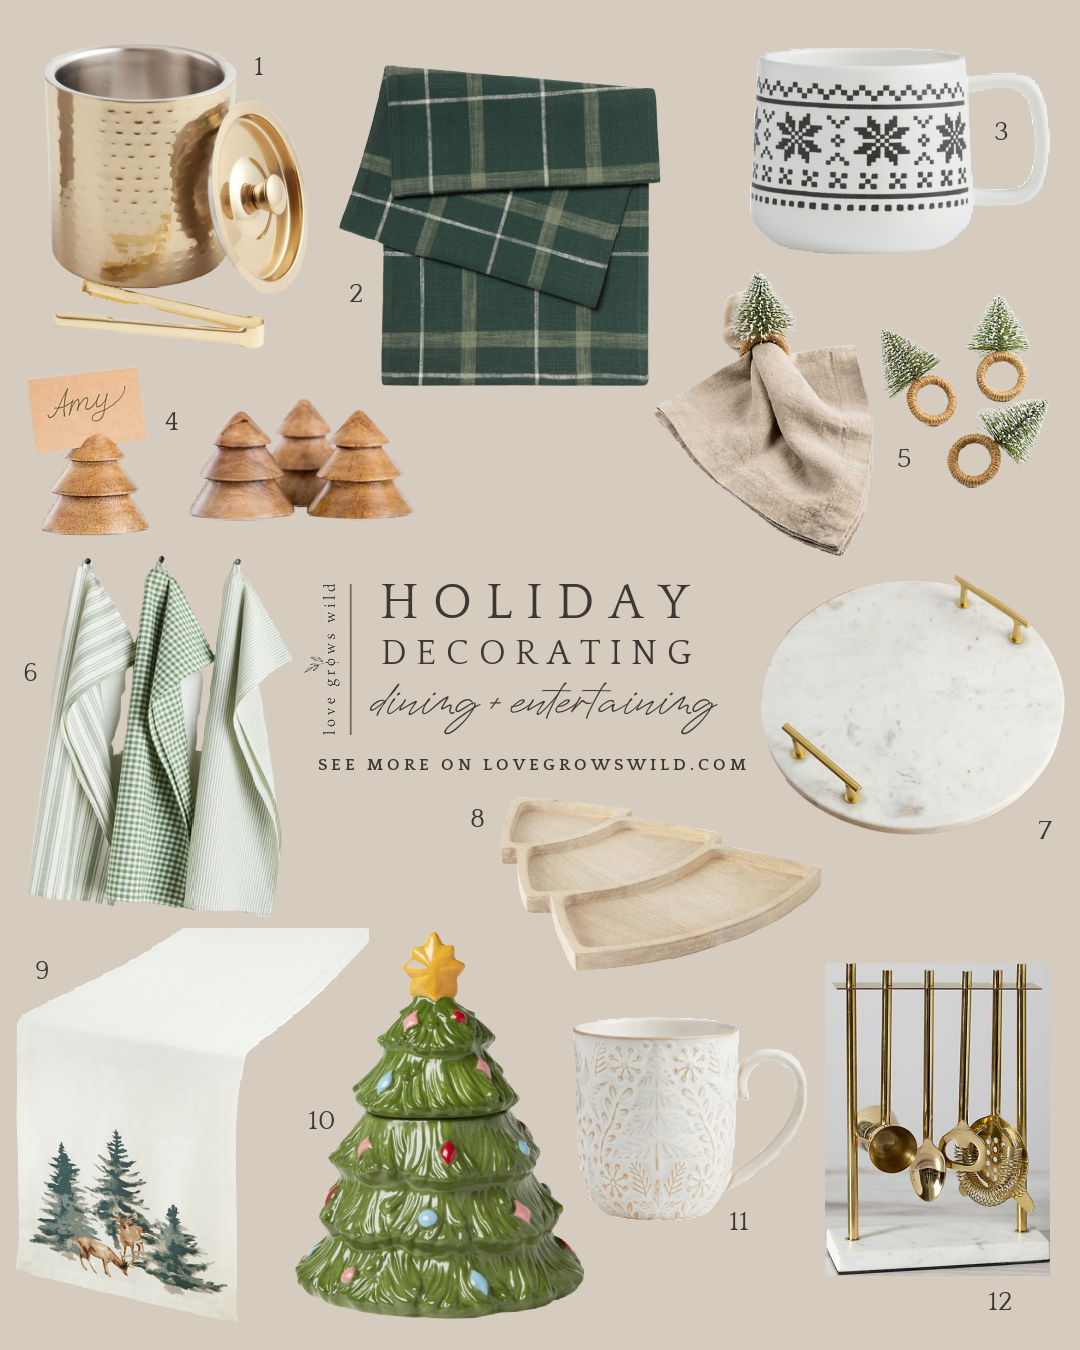 Holiday dining and entertaining finds curated by home blogger Liz Fourez